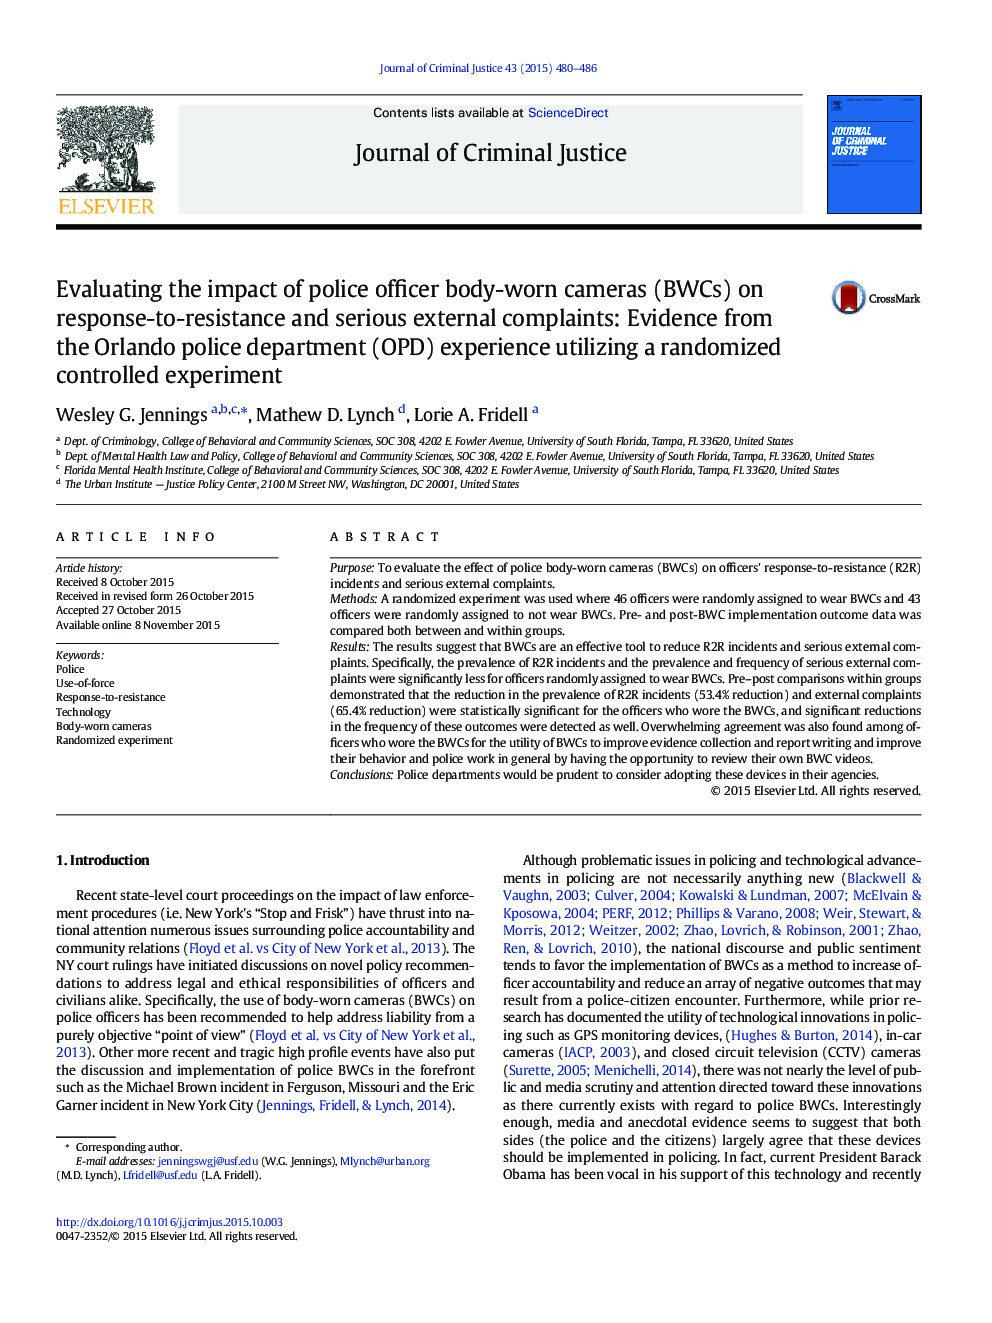 Evaluating the impact of police officer body-worn cameras (BWCs) on response-to-resistance and serious external complaints: Evidence from the Orlando police department (OPD) experience utilizing a randomized controlled experiment